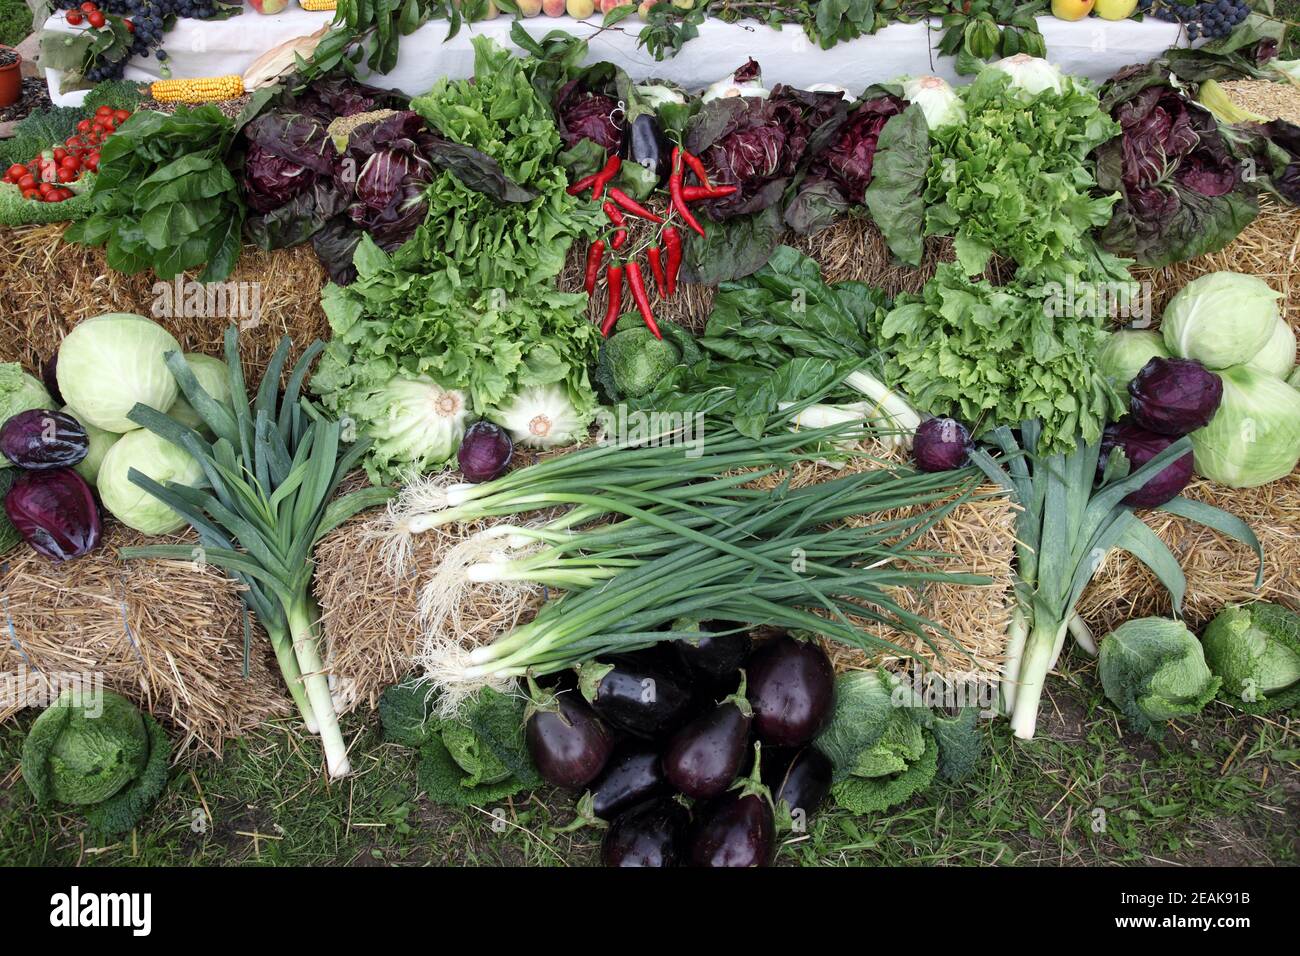 Different types of fruits and vegetables for sale, exposed at the event Dionysius ceremony in Scitarjevo, Croatia Stock Photo